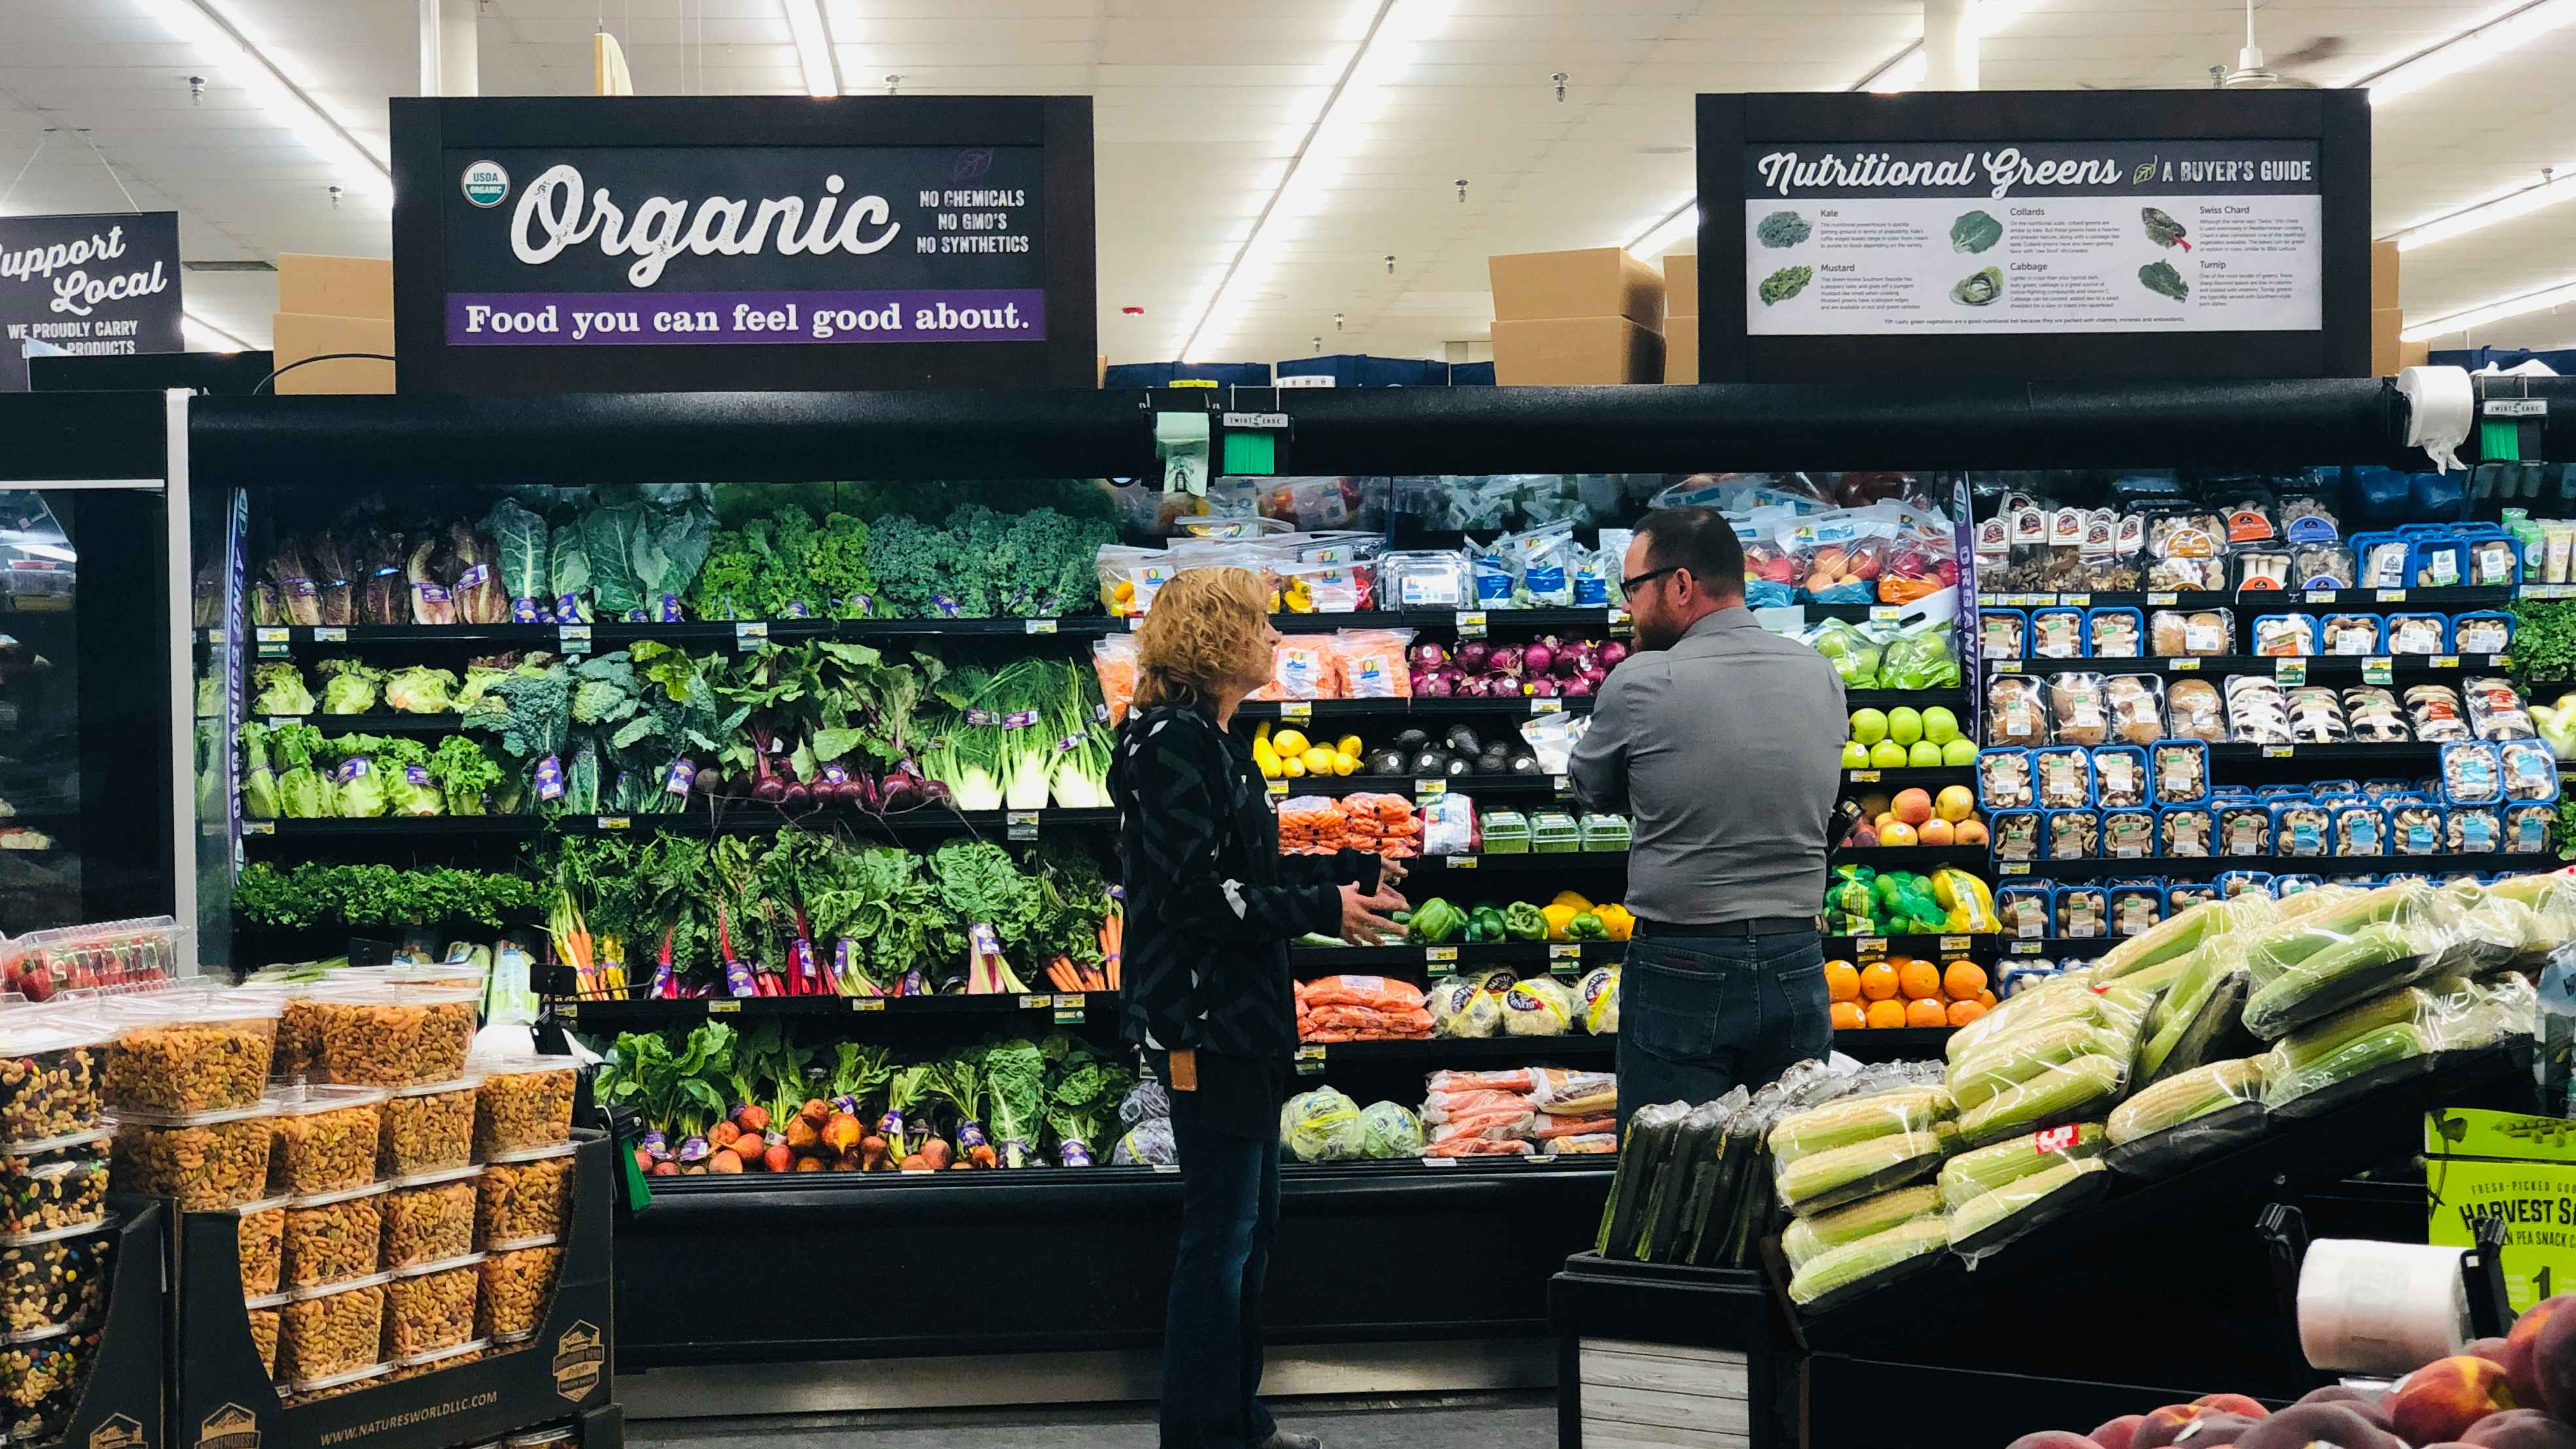 They put the organic produce (i.e. the more expensive) first so you think it's your only choice.